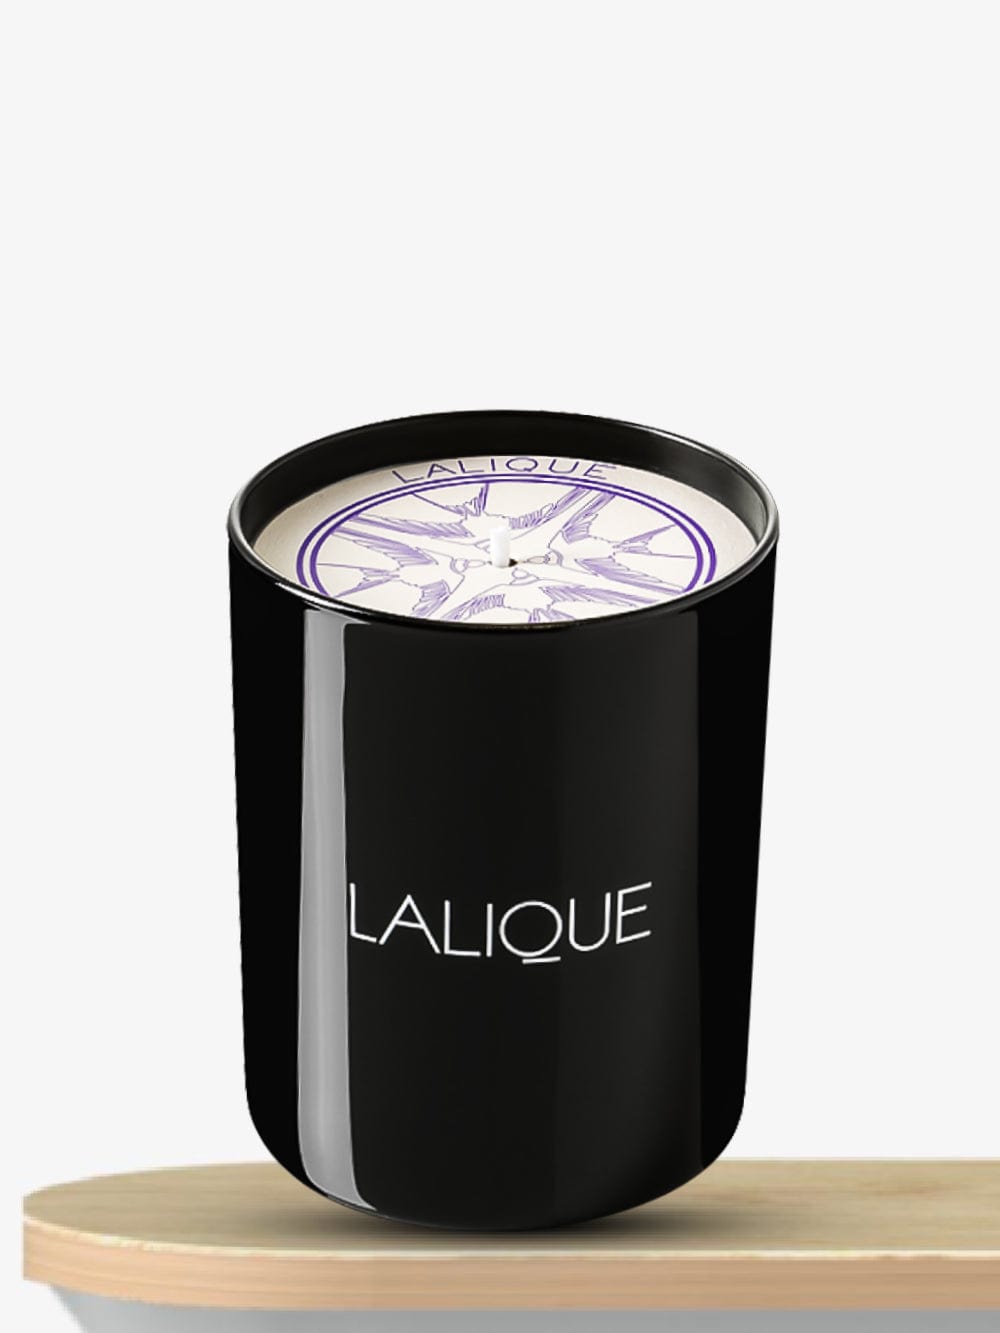 Lalique Figuier Amalfi Italie Scented Candle 190g